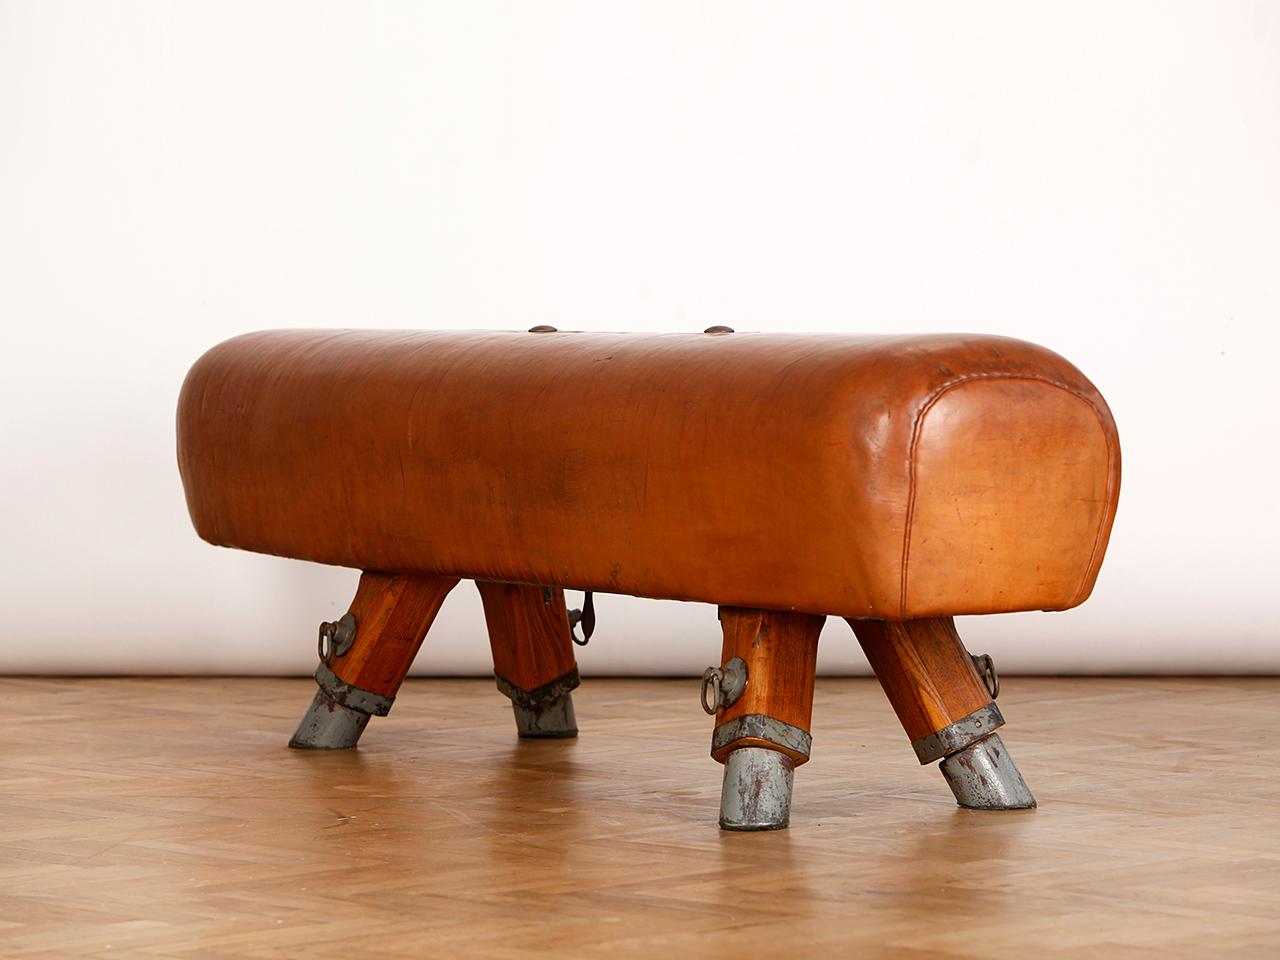 Pommel horse from former Czechoslovakia. It has been shortened to a height of 54 cm. The iron feet are preserved. 
He has extra length of 193cm. The thick leather has been cleaned, restored wood surface and the patina was retained. Very good vintage